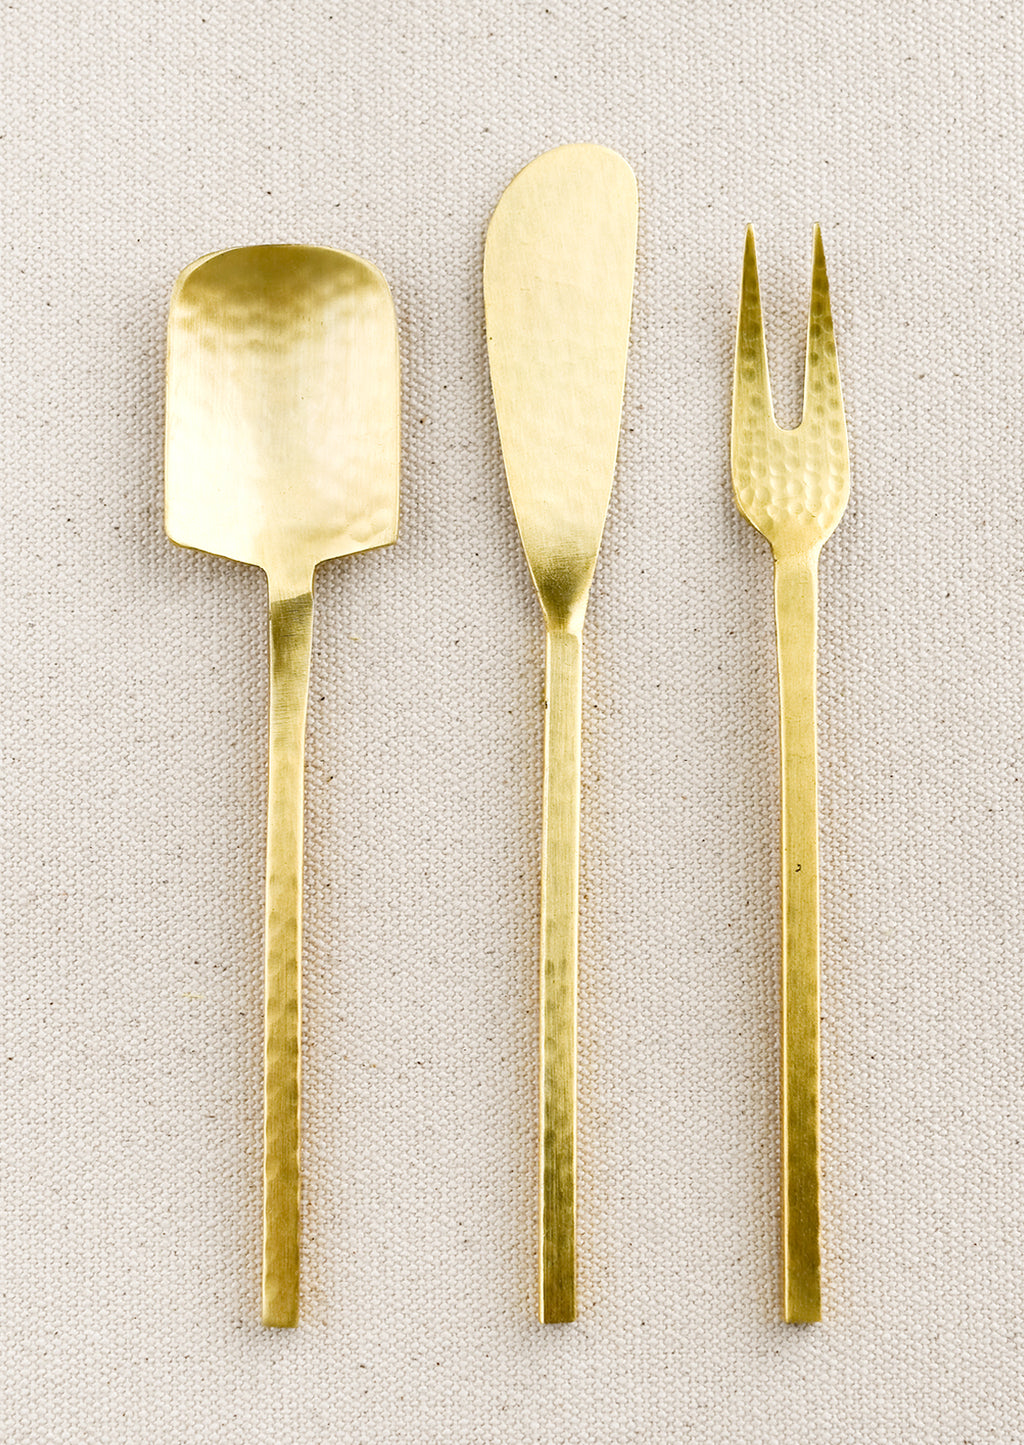 Knife: A spoon, fork and knife canape utensils in hammered gold finish.